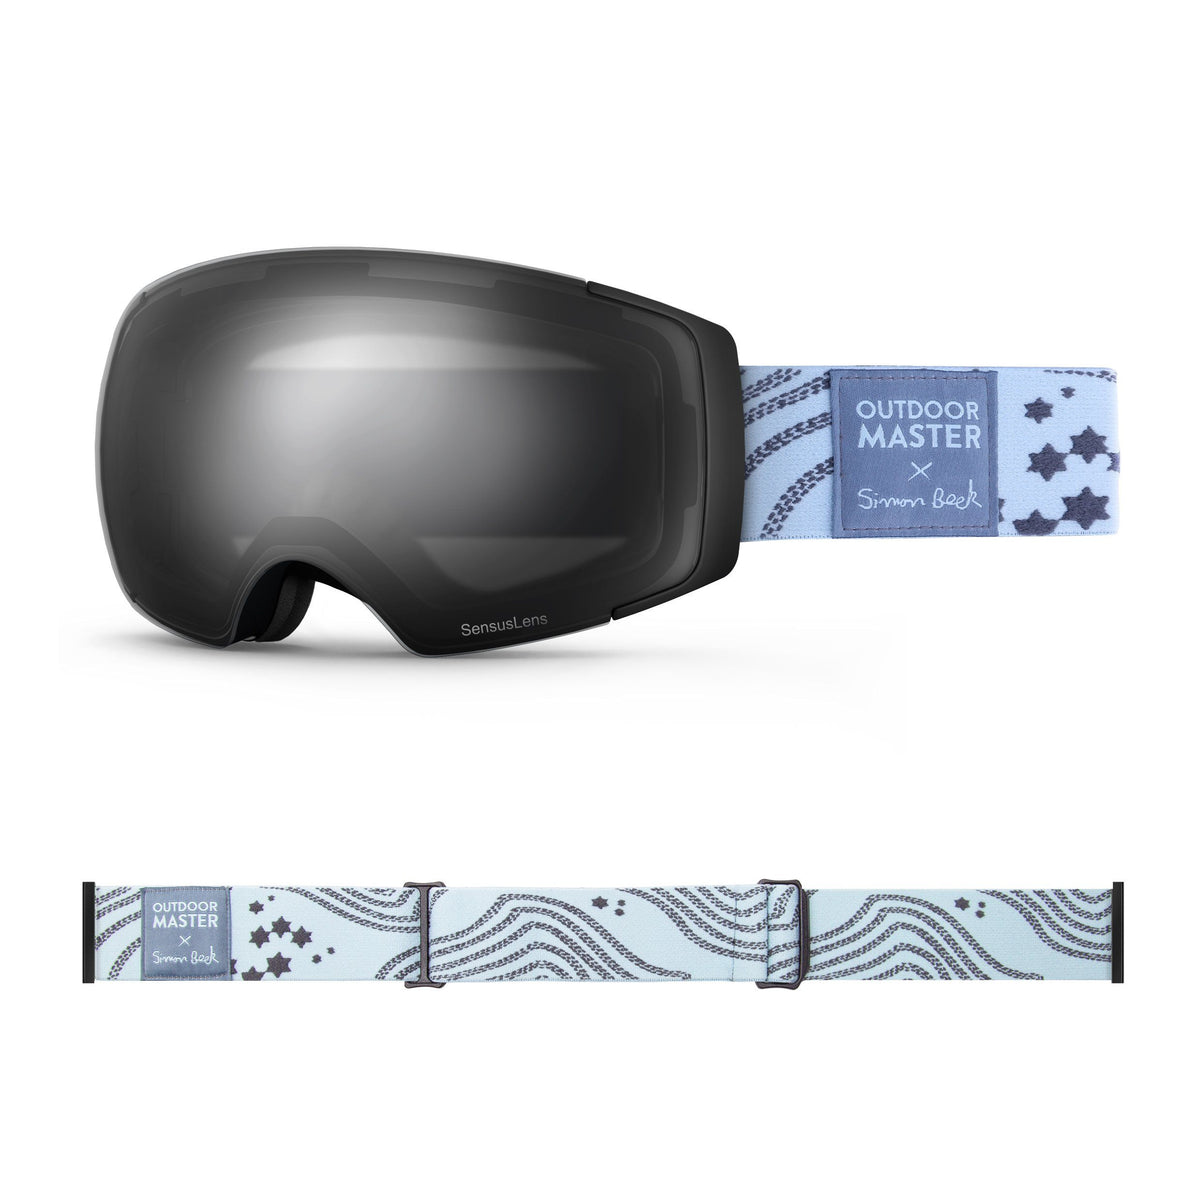 OutdoorMaster x Simon Beck Ski Goggles Pro Series - Snowshoeing Art Limited Edition OutdoorMaster SensusLens VLT 16-80% Photochromatic clear to Grey Star Road-Lightsteelblue